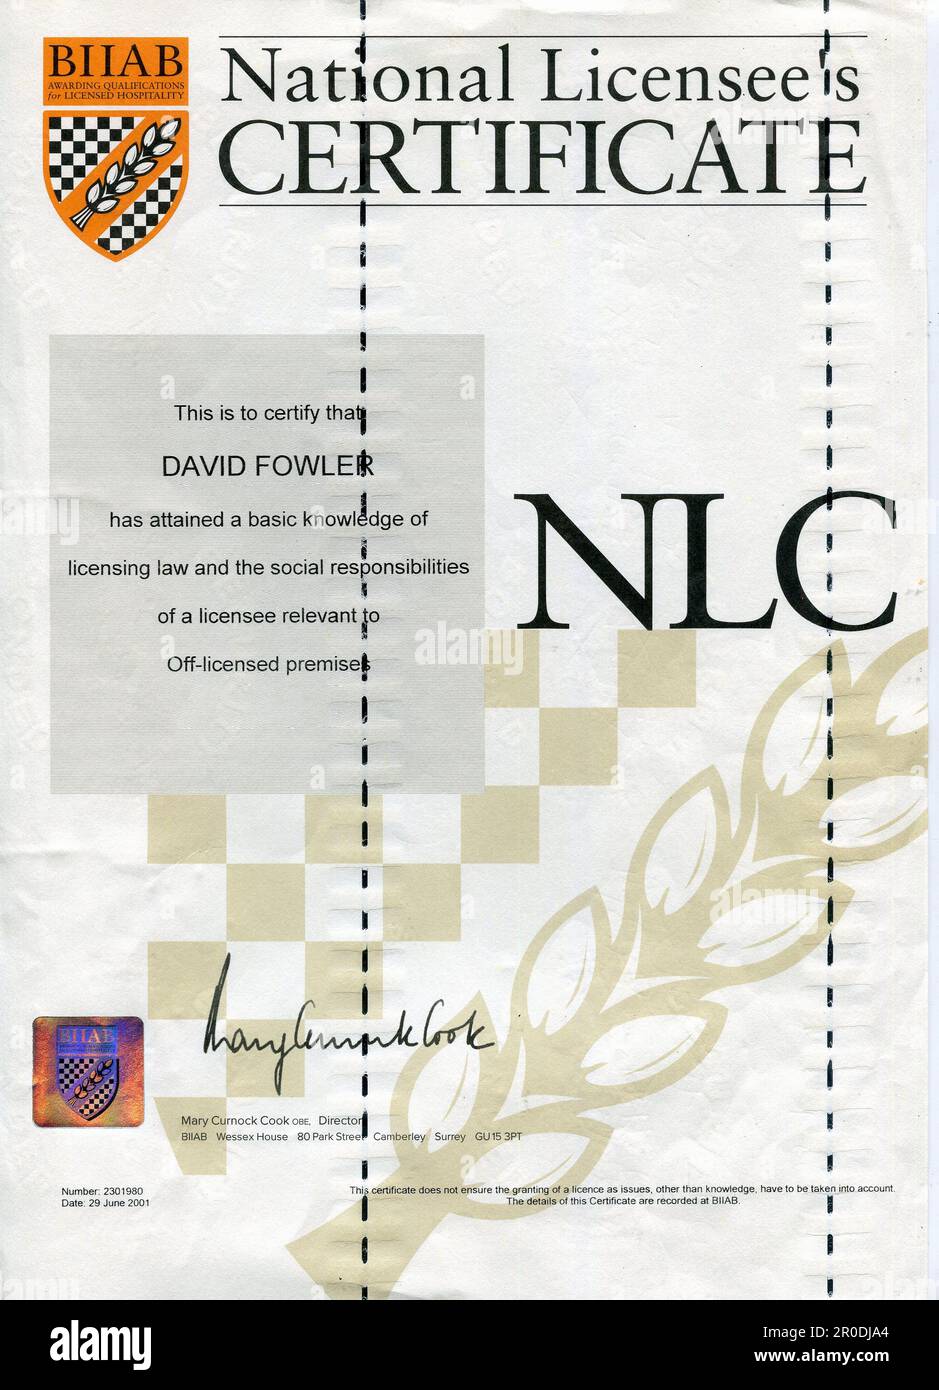 A National Licensee Certificate awarded by the British Institute of Innkeepers allowing an individual to sell alcohol for consumption off the premises. Stock Photo